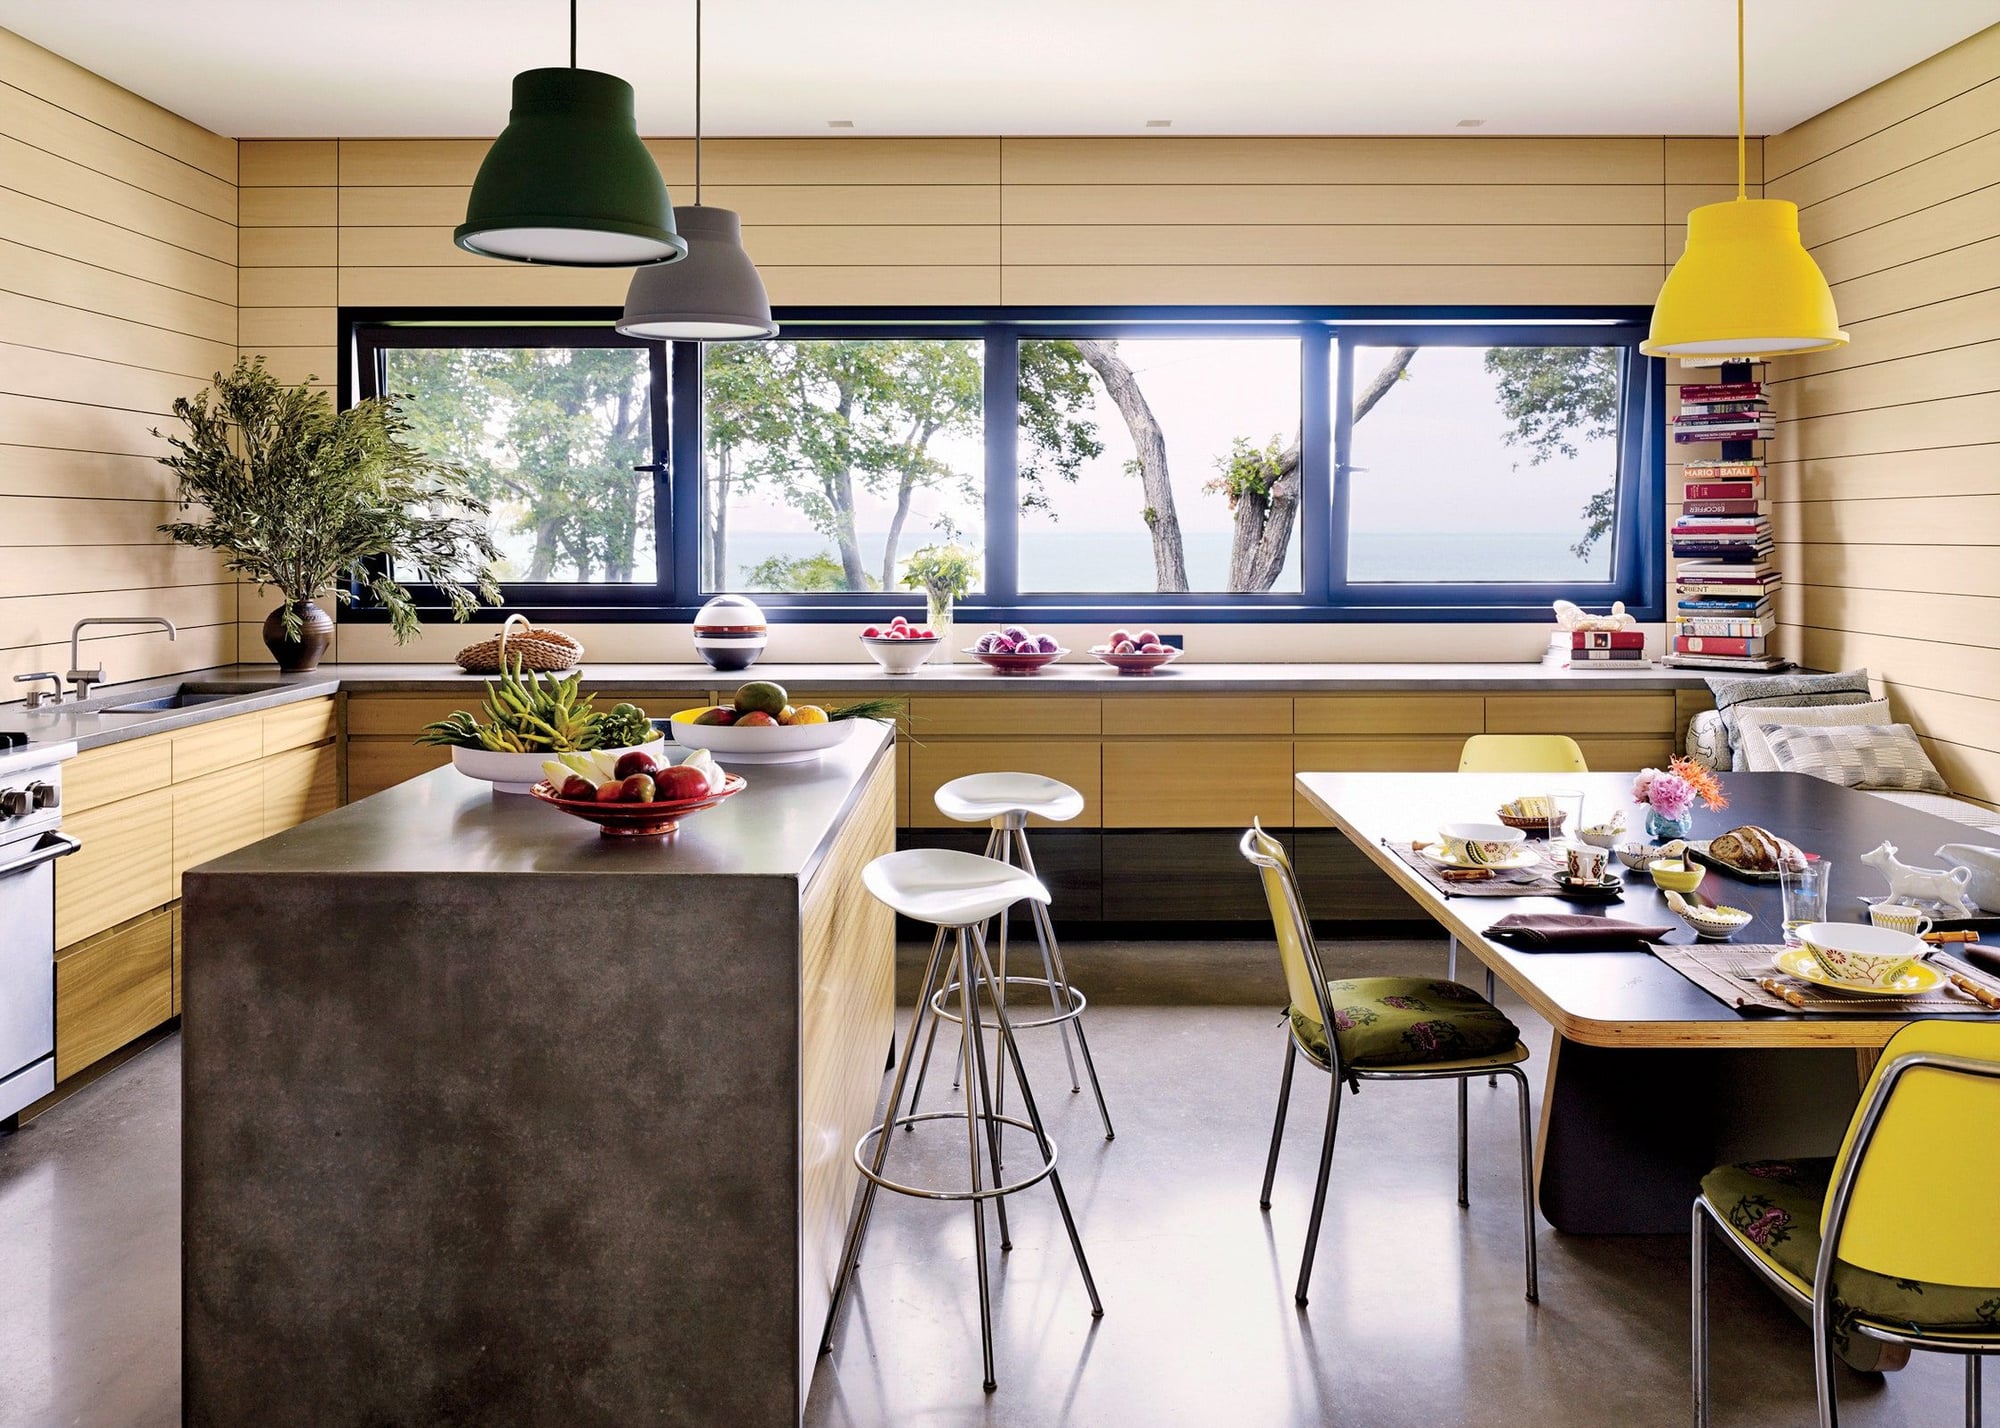 This contemporary kitchen space thrives on its combination of manmade and natural textures.